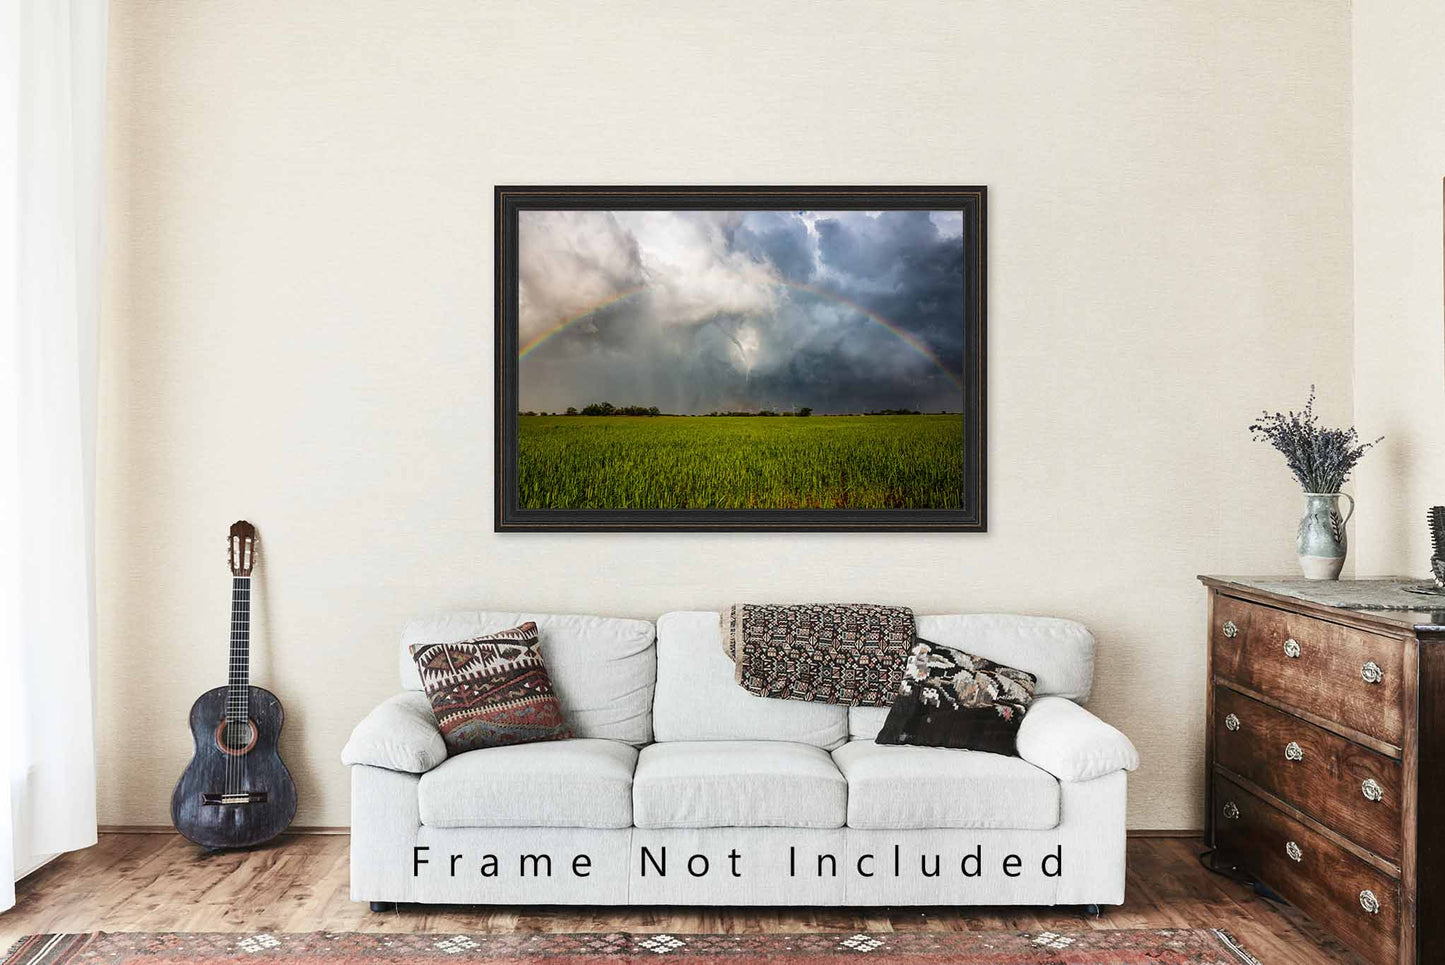 Storm Photography Print (Not Framed) Picture of Tornado Roping Out Under Full Rainbow on Stormy Spring Day in Texas Thunderstorm Wall Art Nature Decor